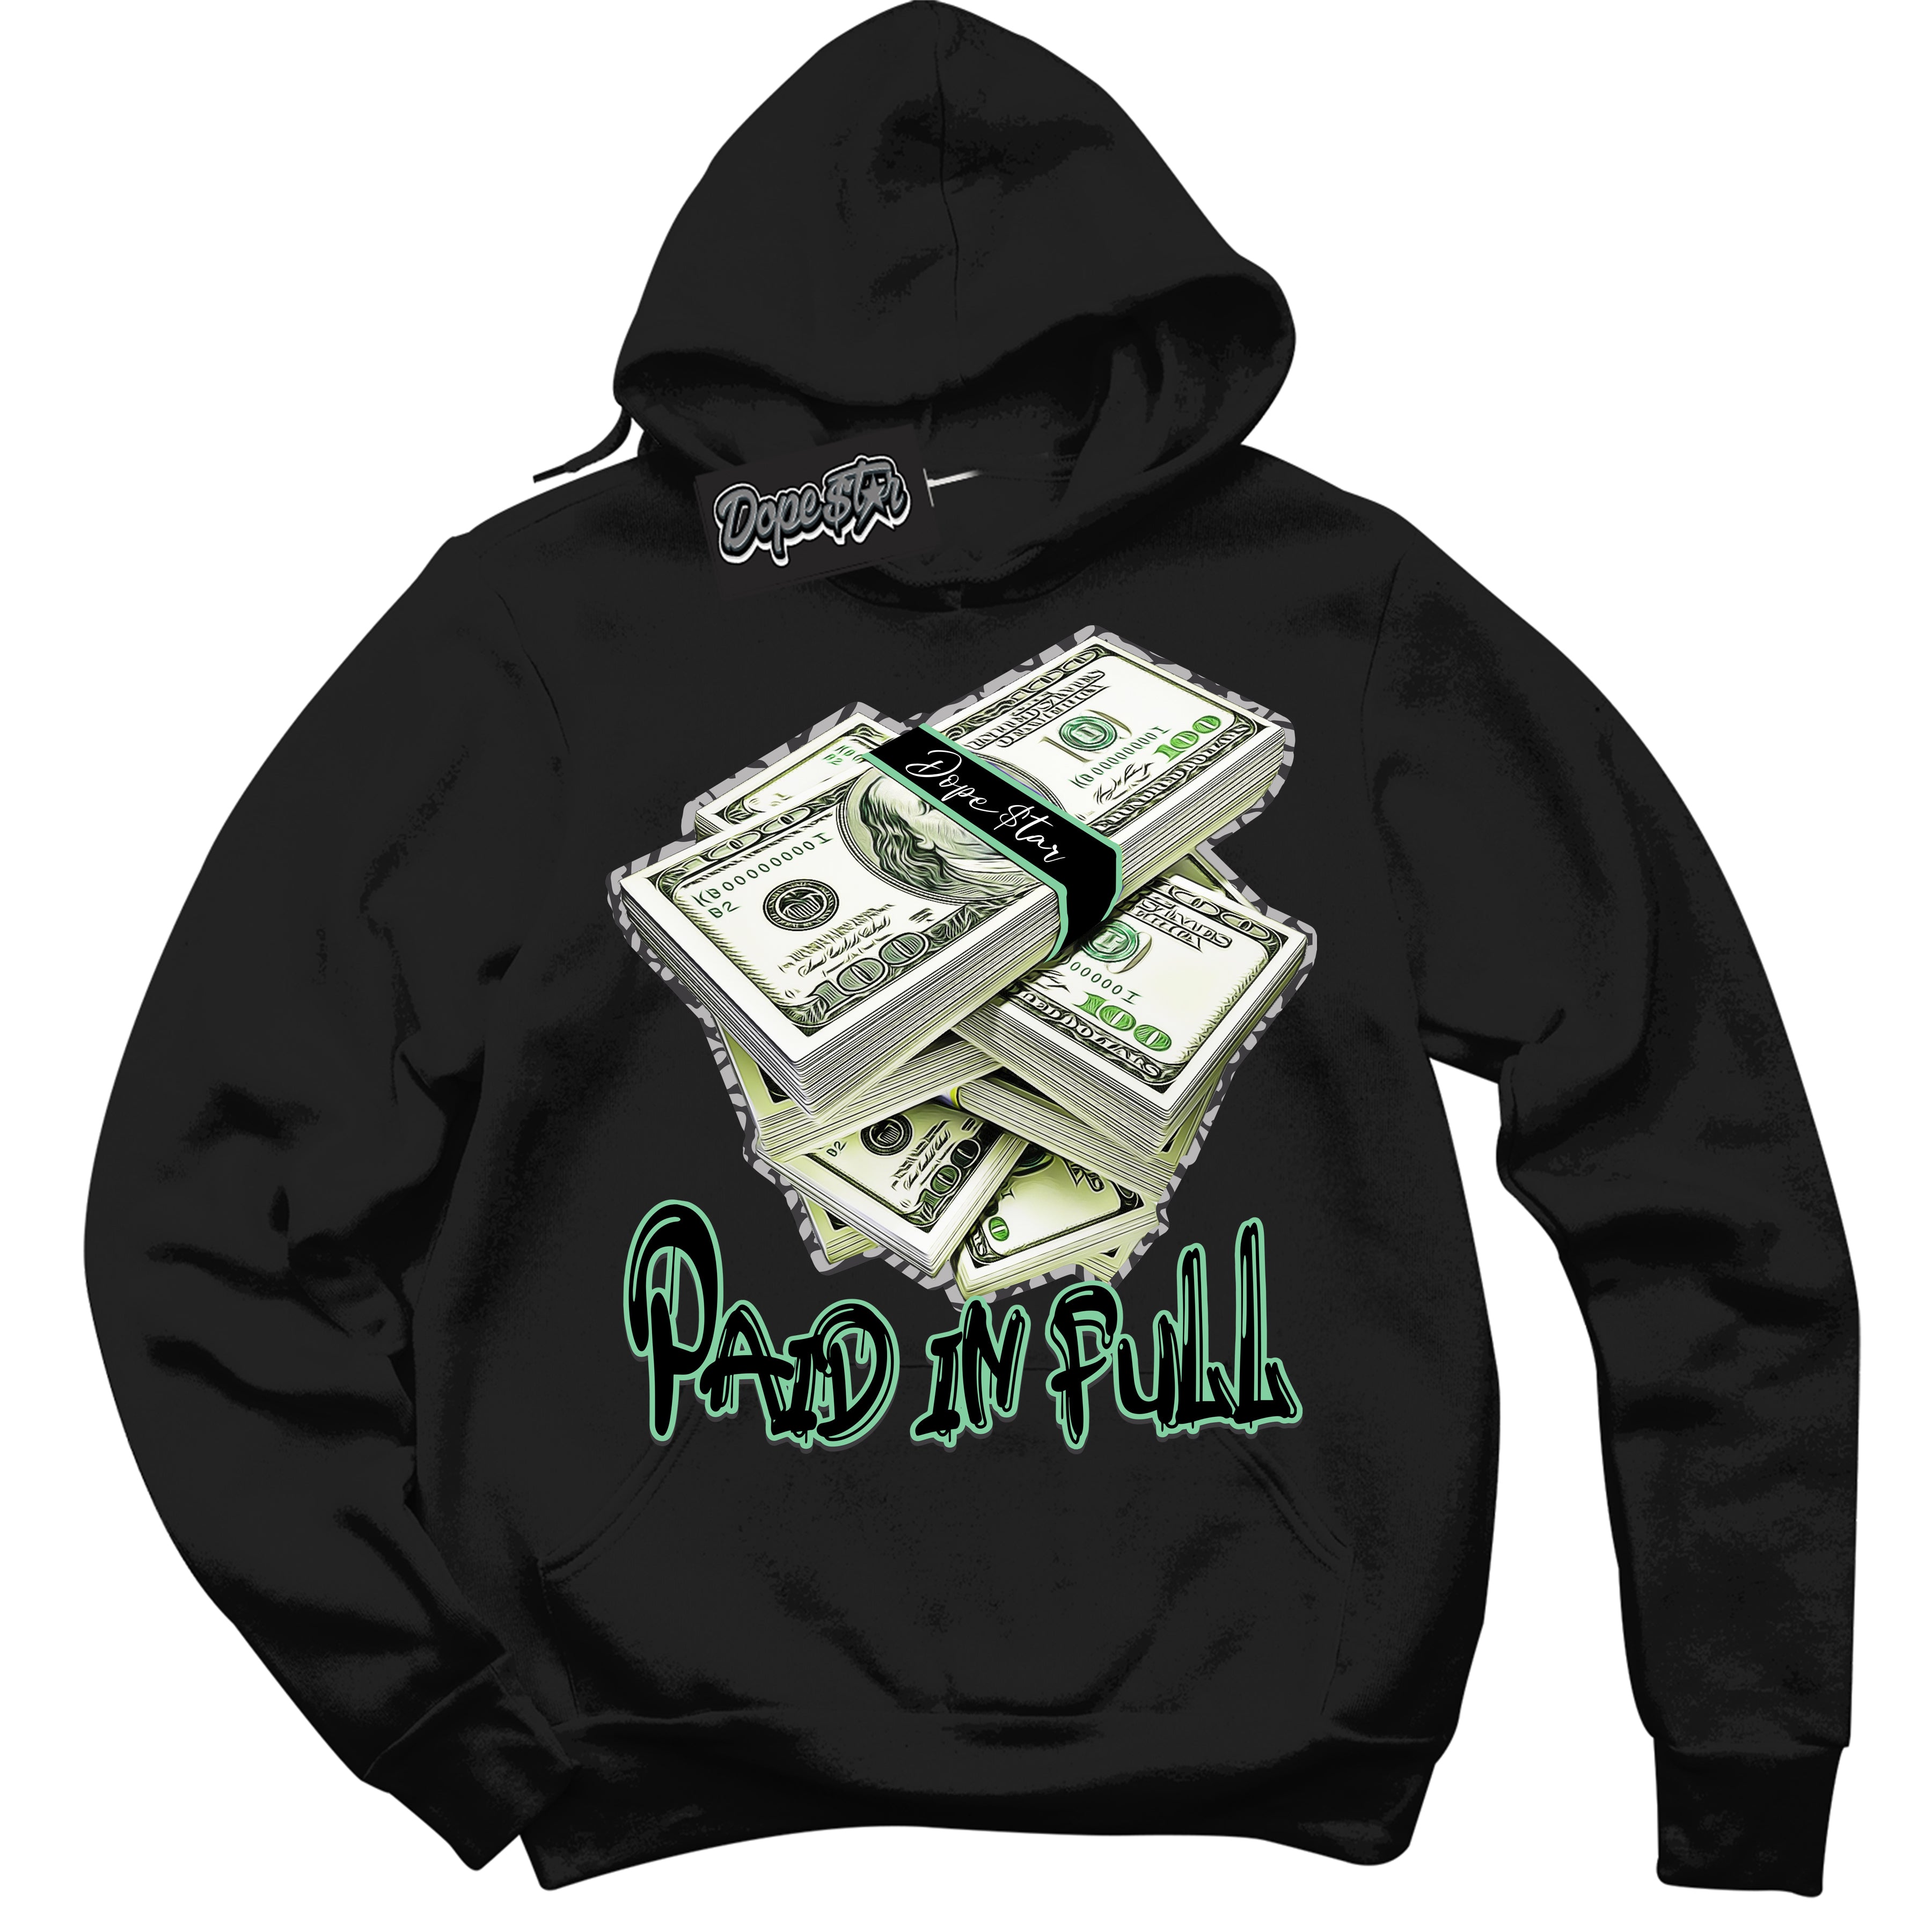 Cool Black Graphic DopeStar Hoodie with “ Paid In Full “ print, that perfectly matches Green Glow 3S sneakers